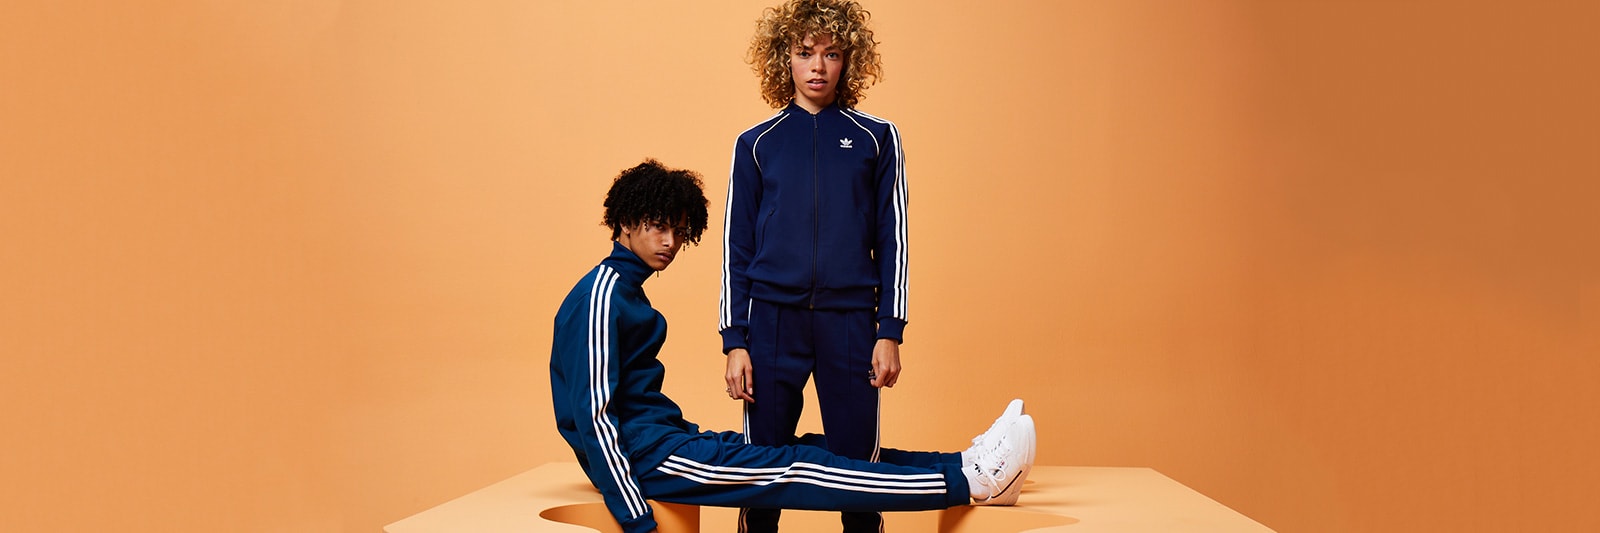 adidas track outfits